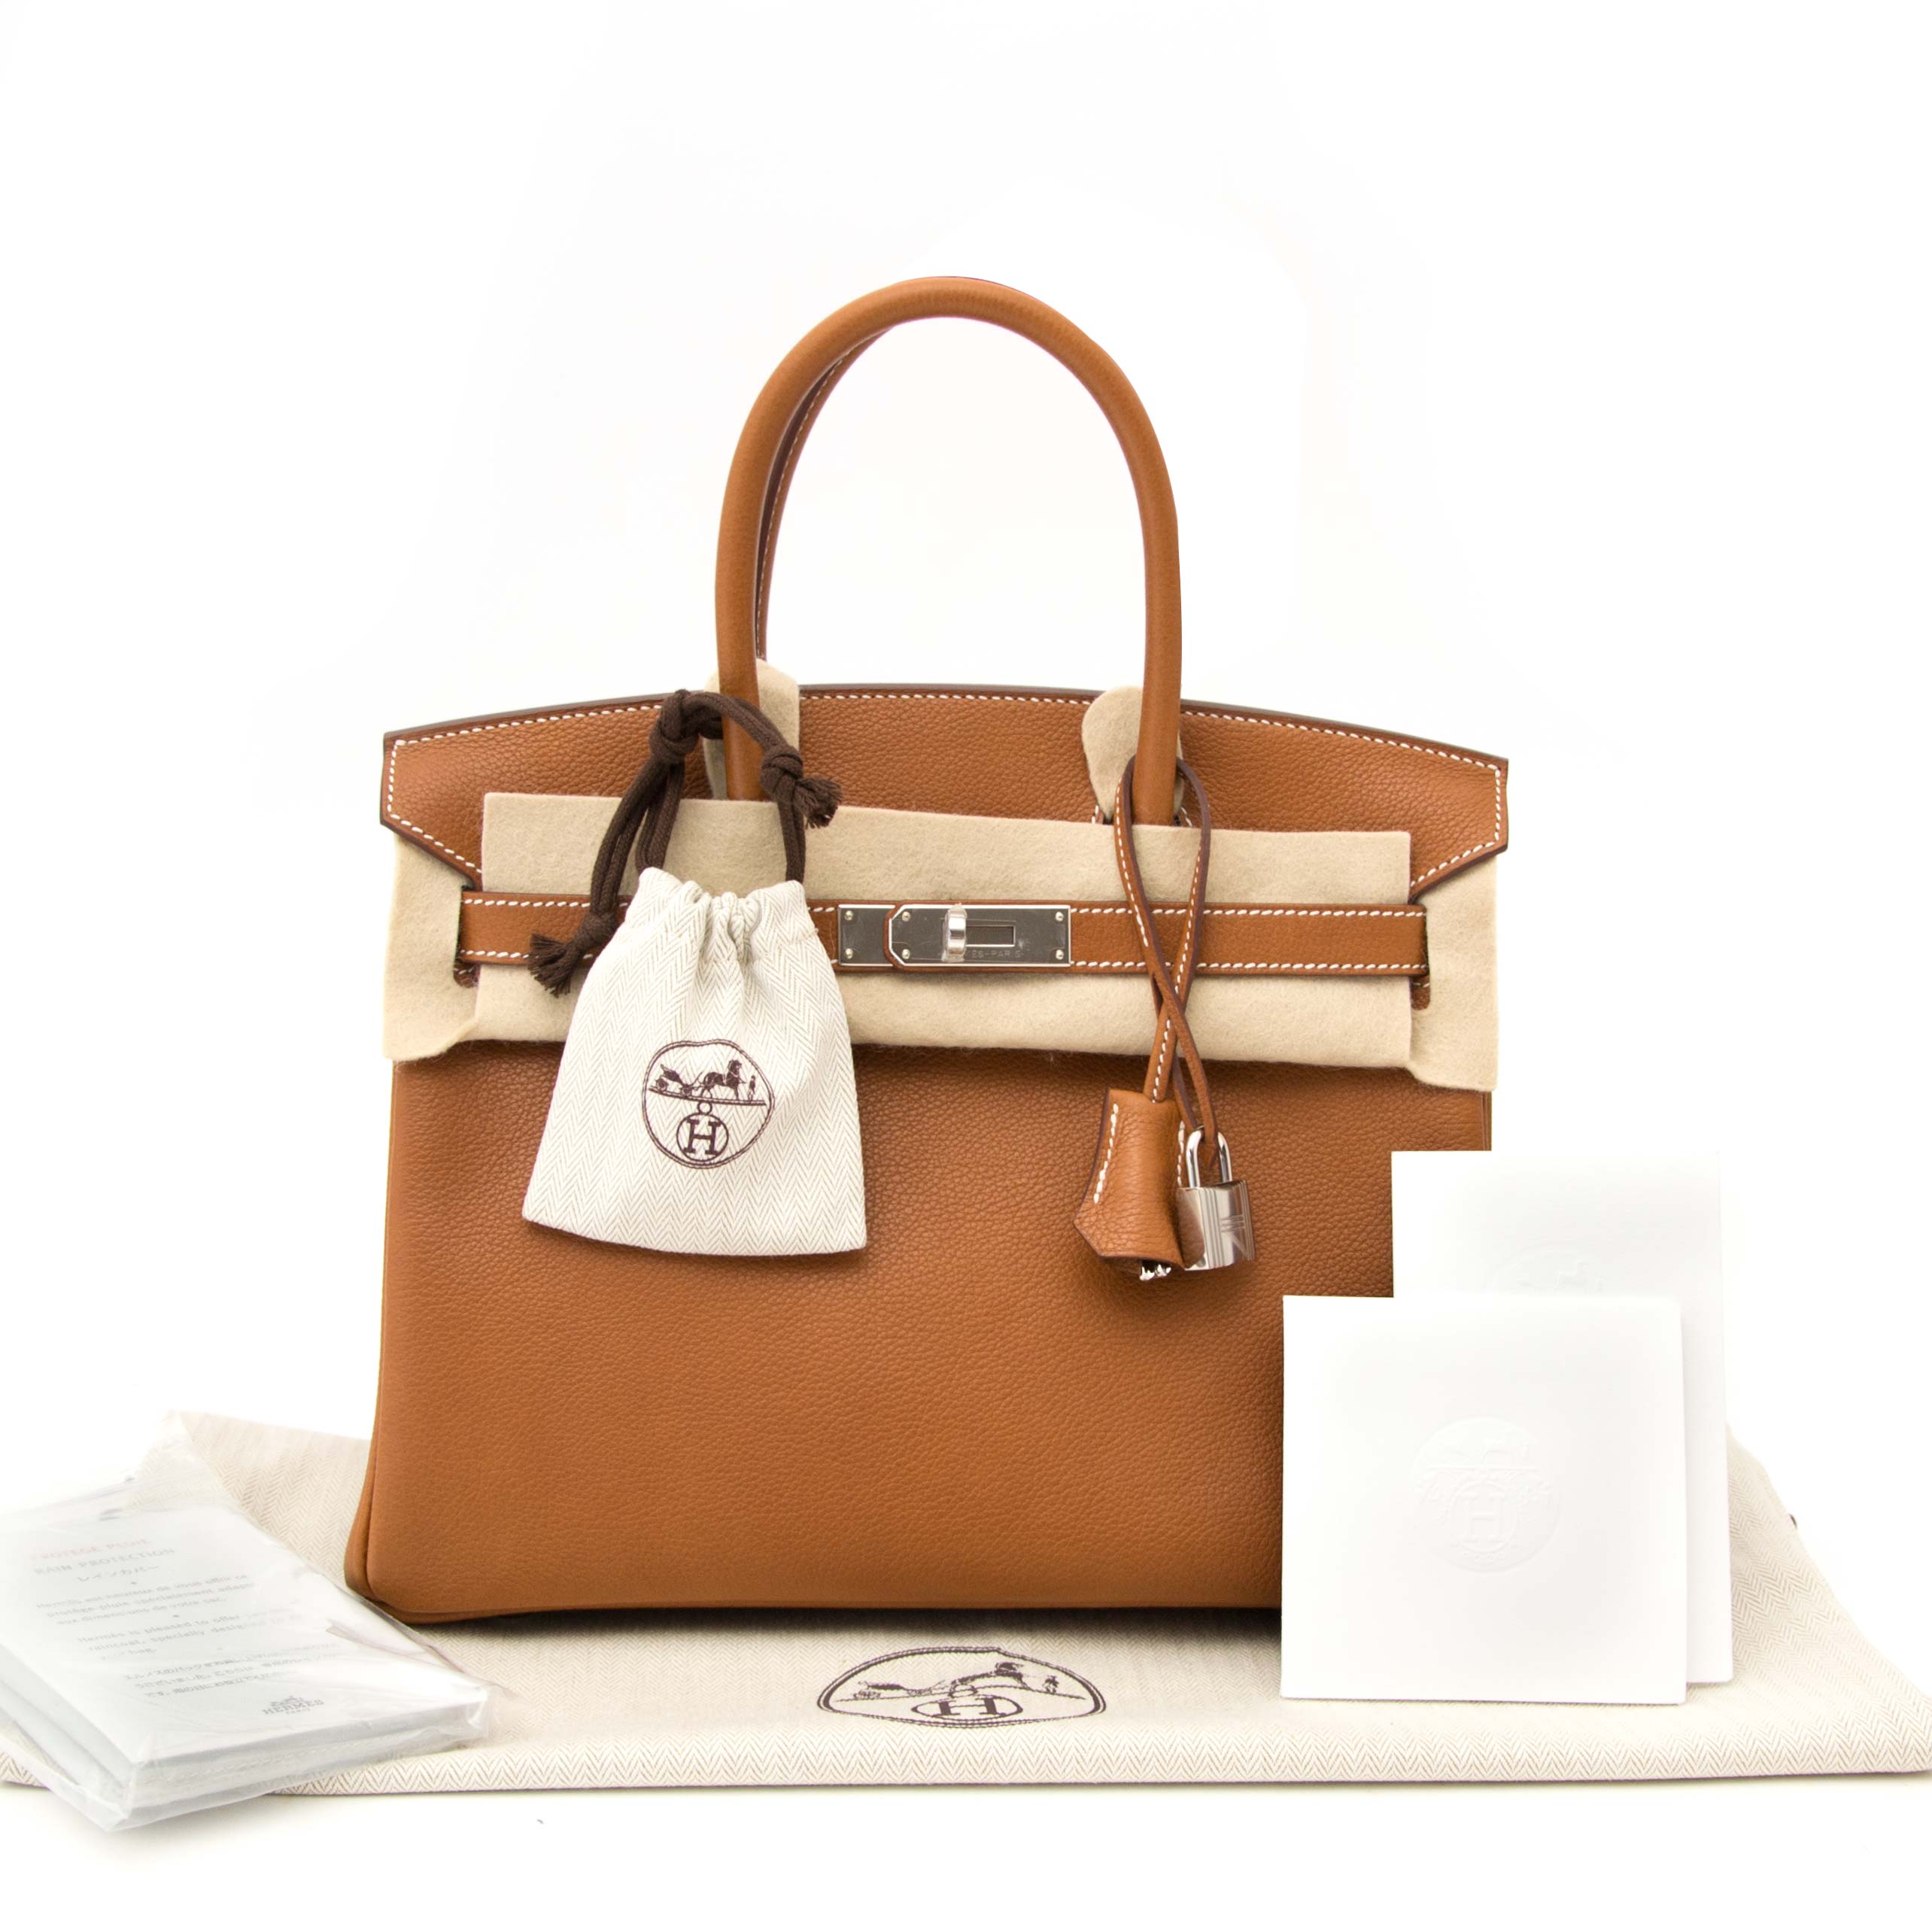 Sell Hermès Cabasellier 31 in Fauve Barenia Faubourg - Brown